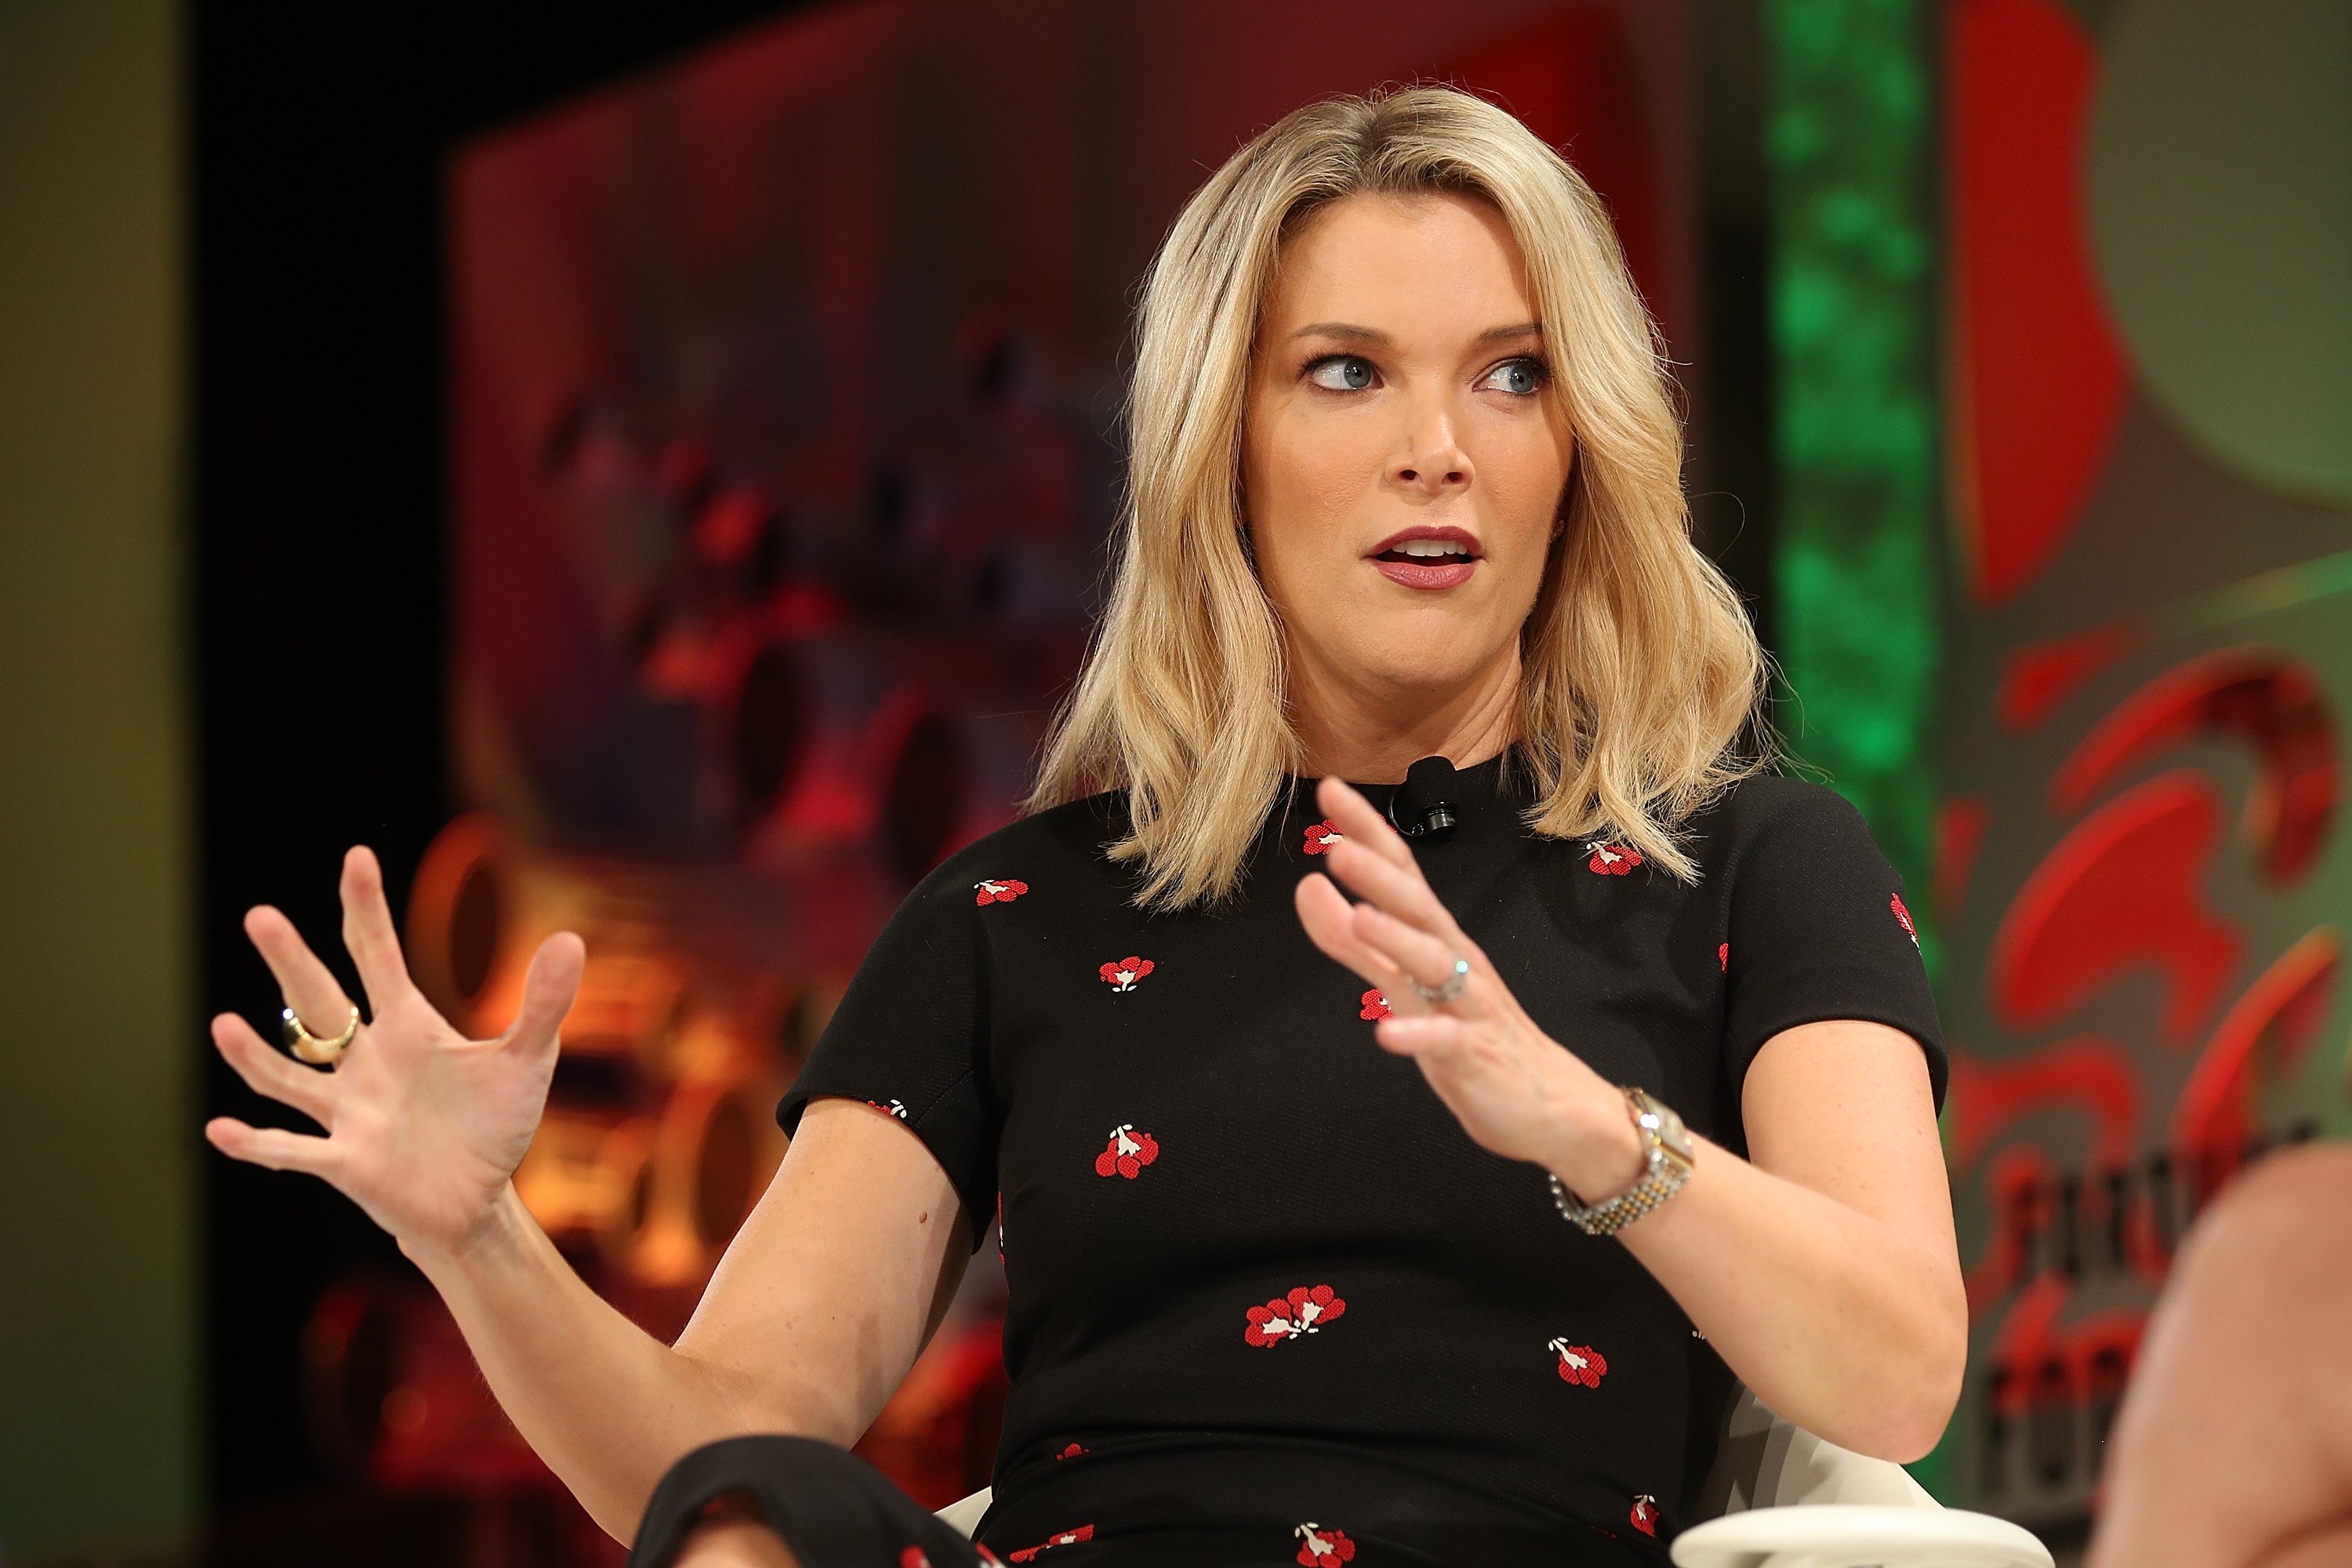 Megyn Kelly at the Fortune Most Powerful Women Summit in California 2018. | Source: Getty Images